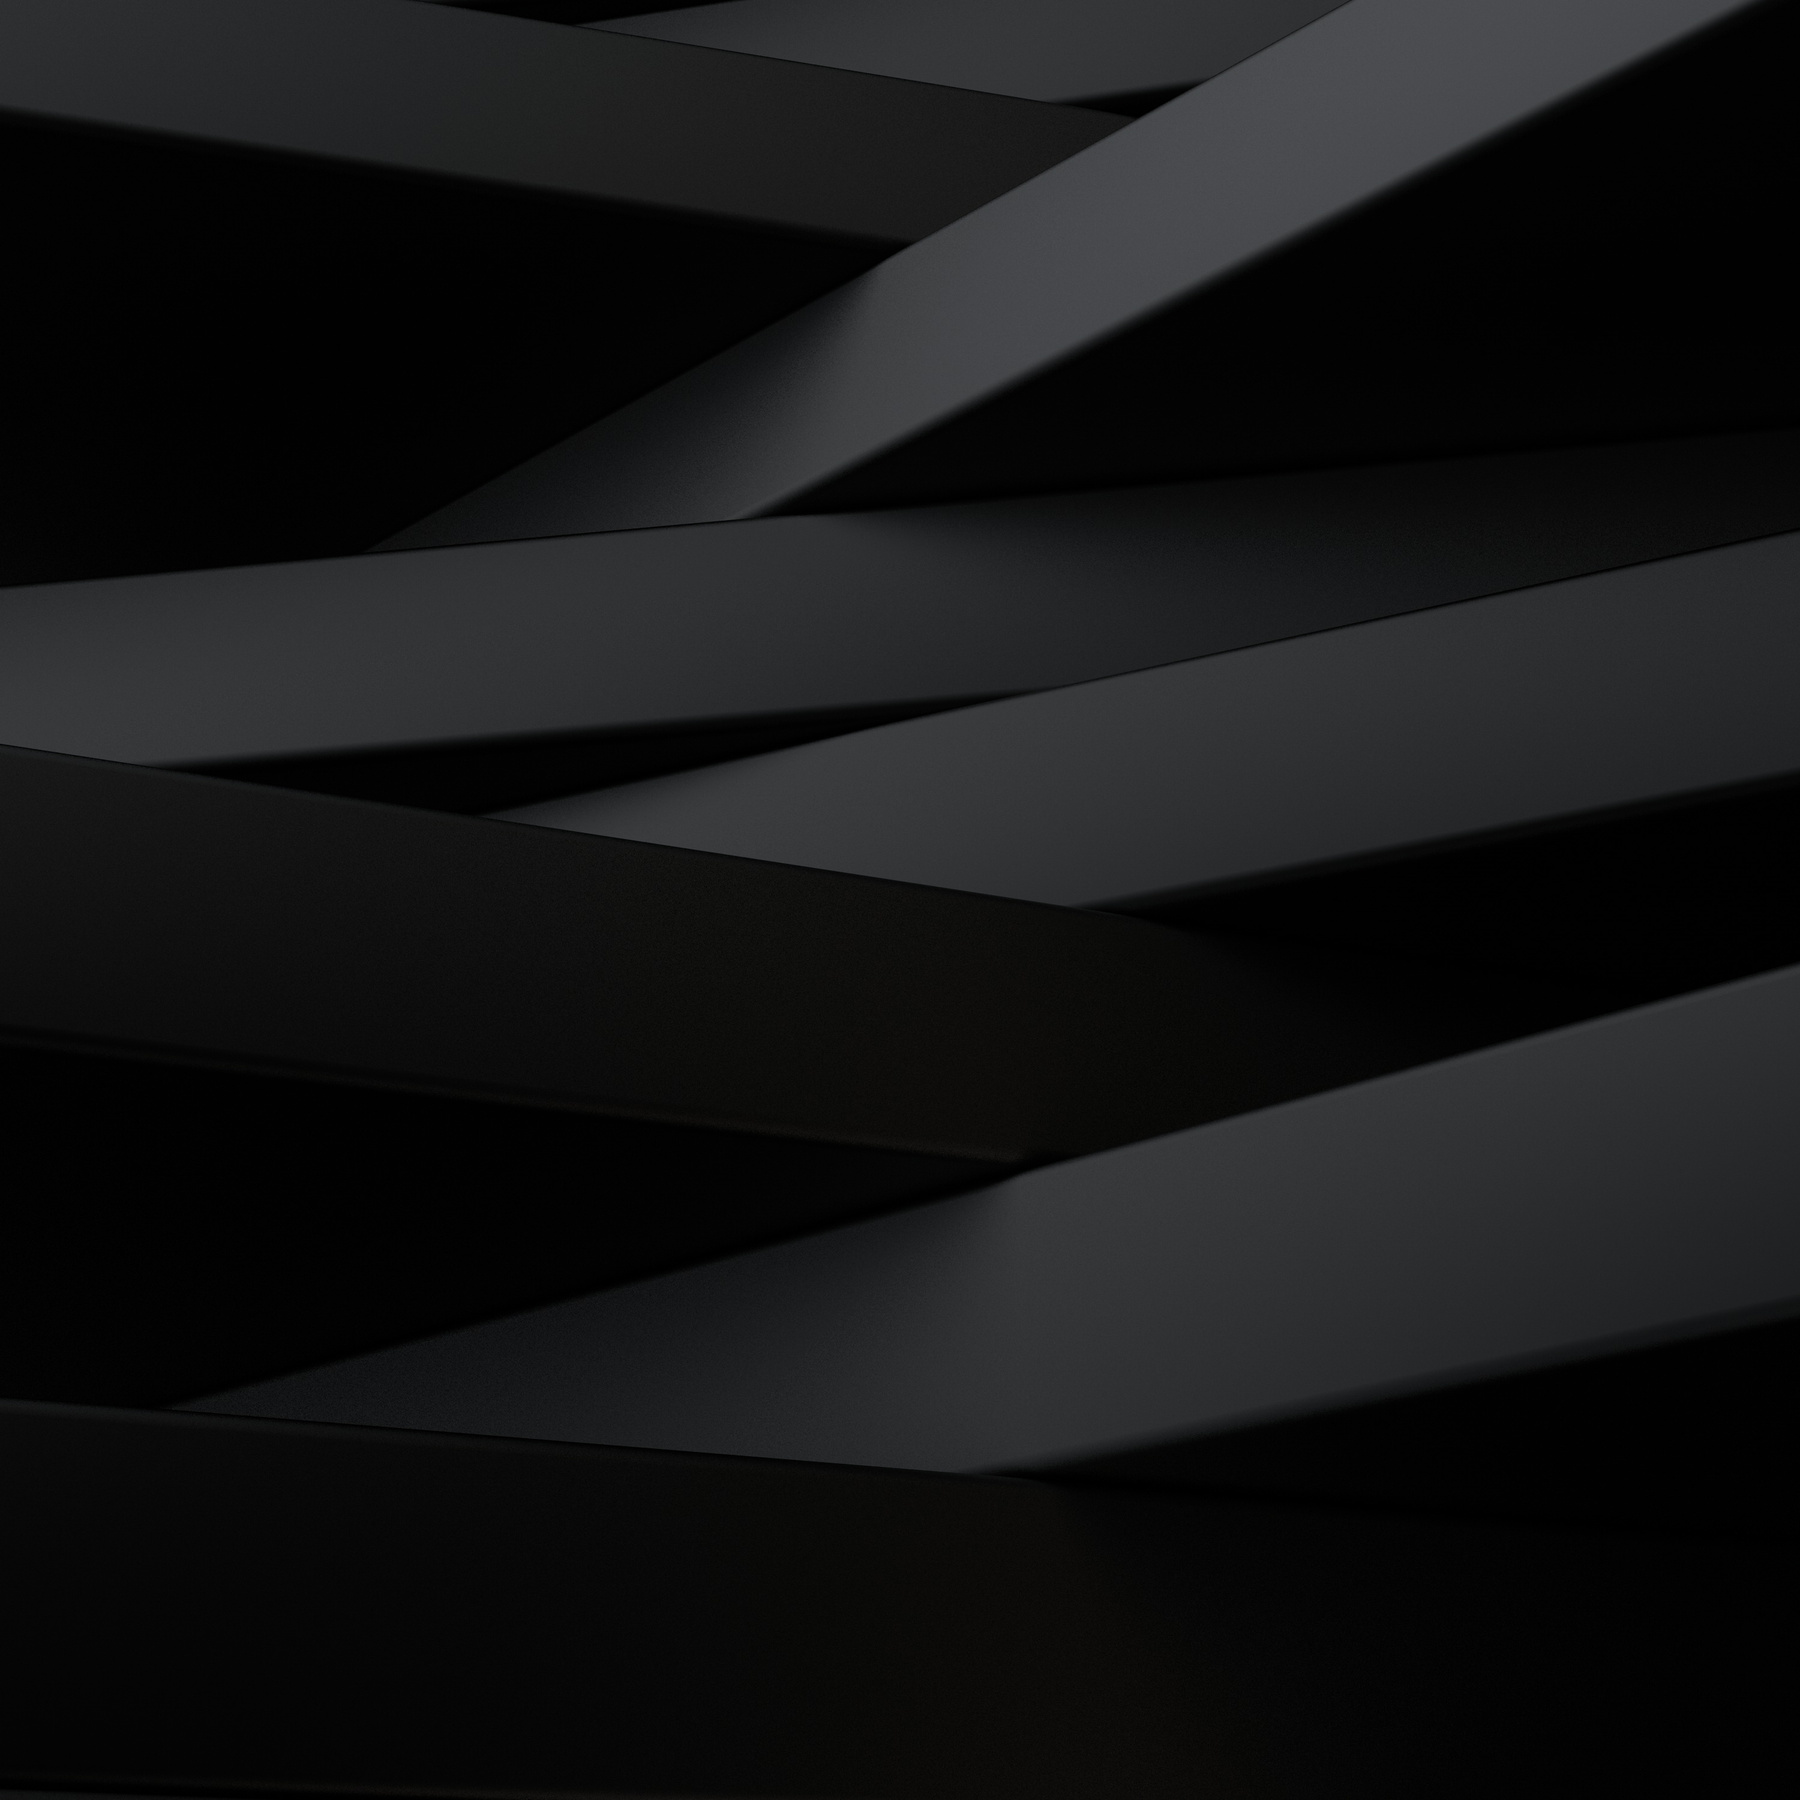 Abstract black panels 3D background